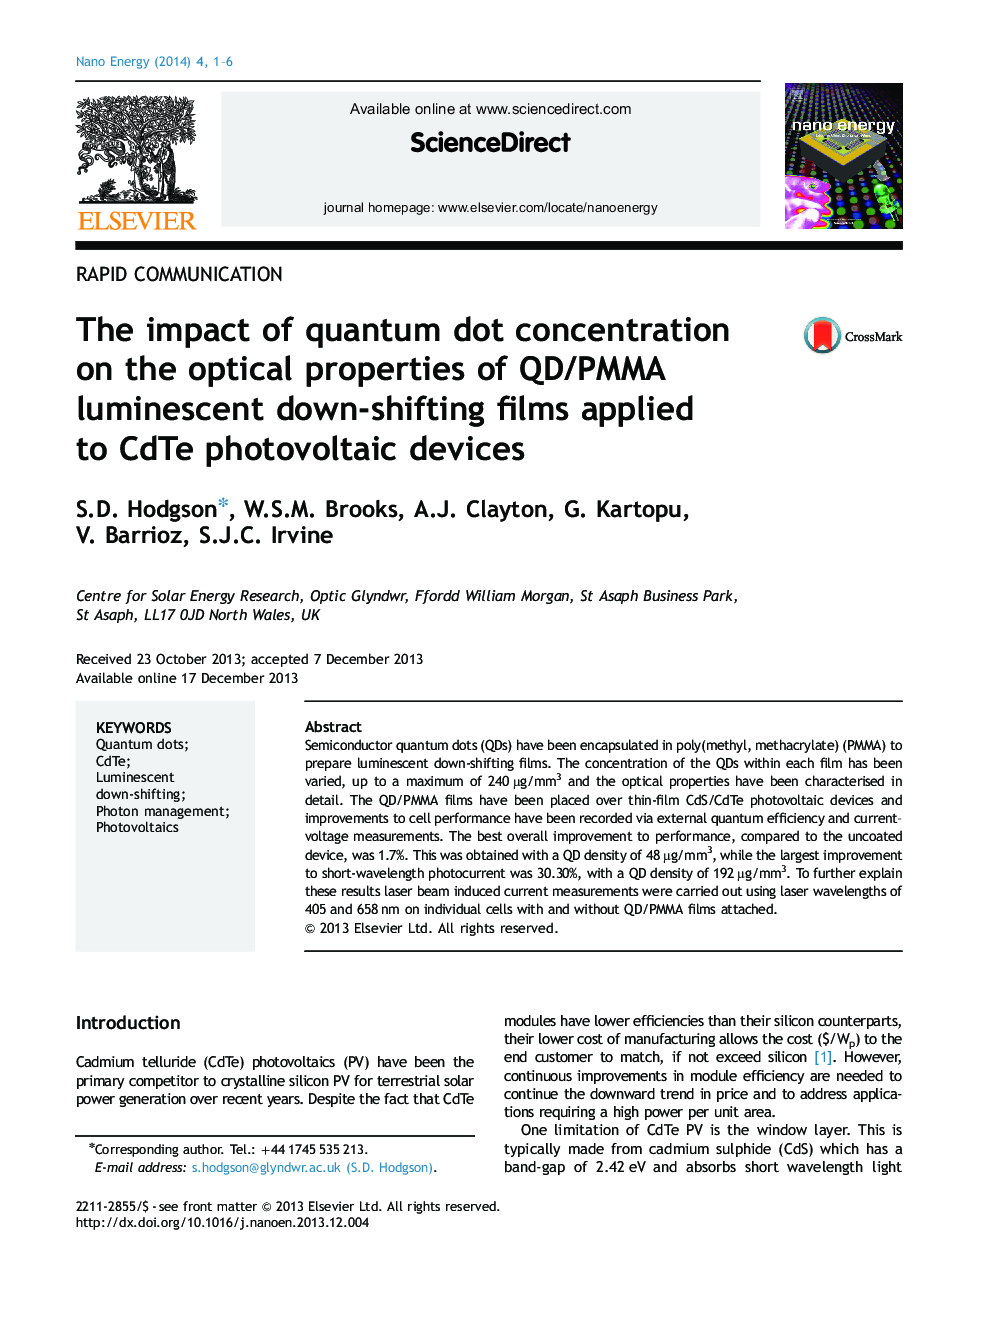 The impact of quantum dot concentration on the optical properties of QD/PMMA luminescent down-shifting films applied to CdTe photovoltaic devices